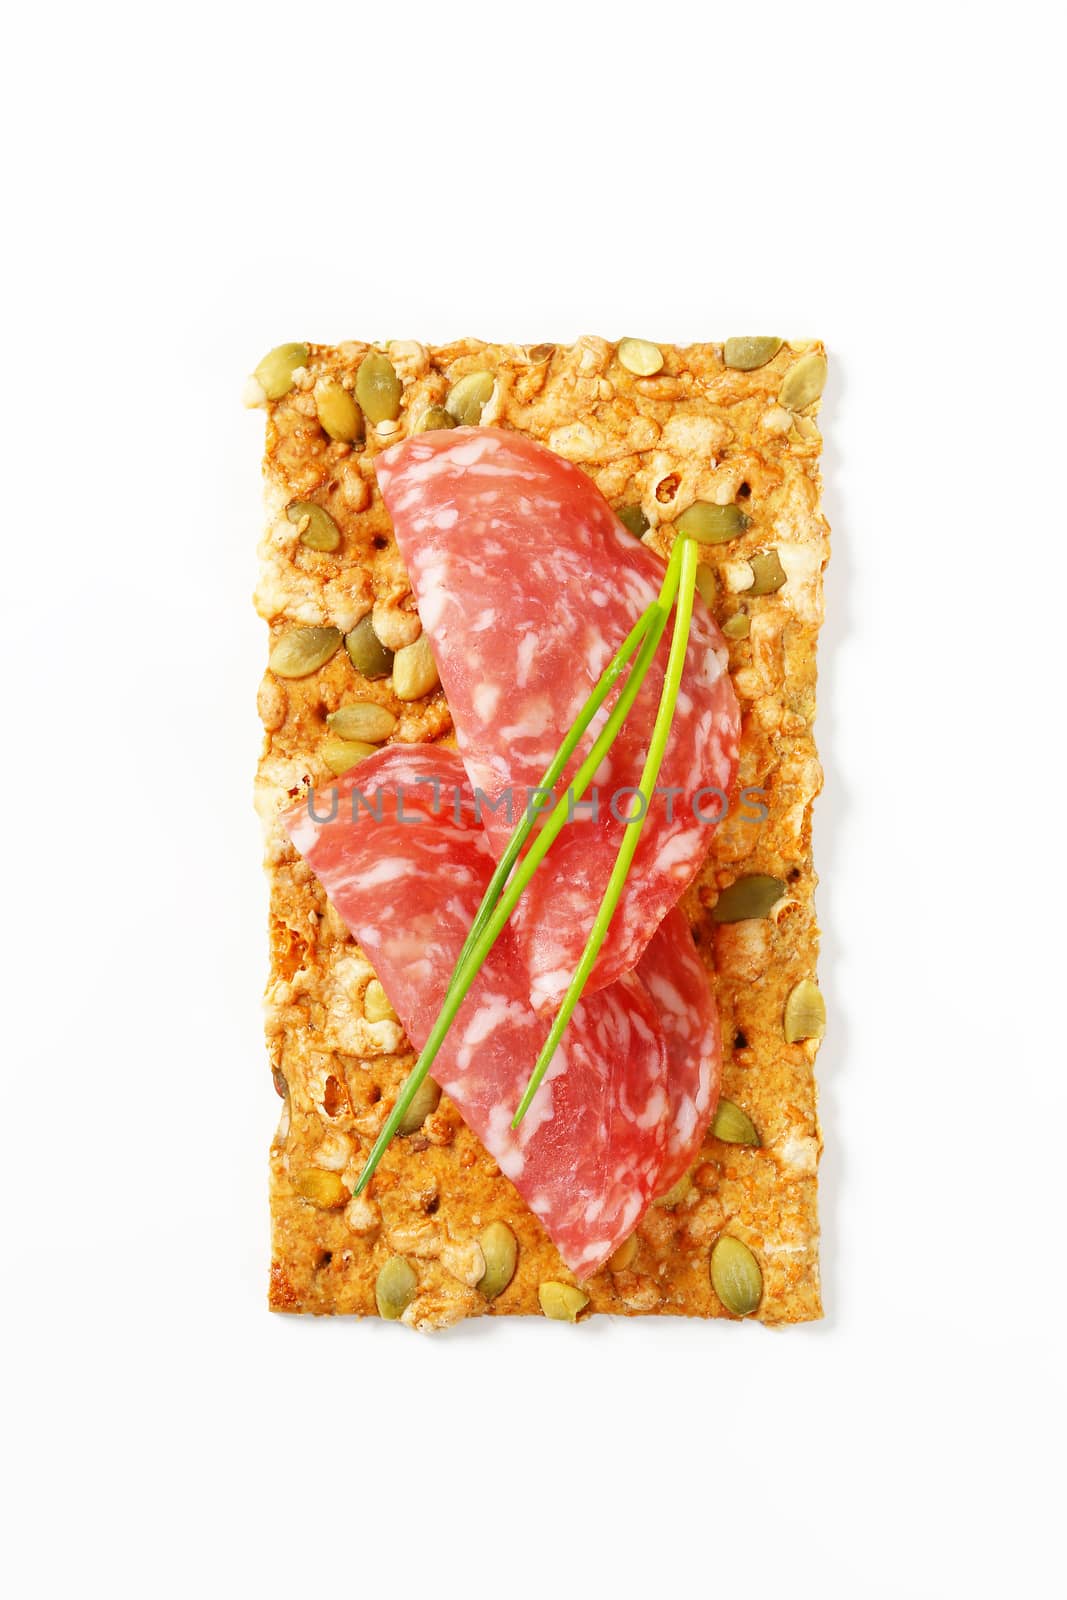 pumpkin seed cracker with dry salami by Digifoodstock